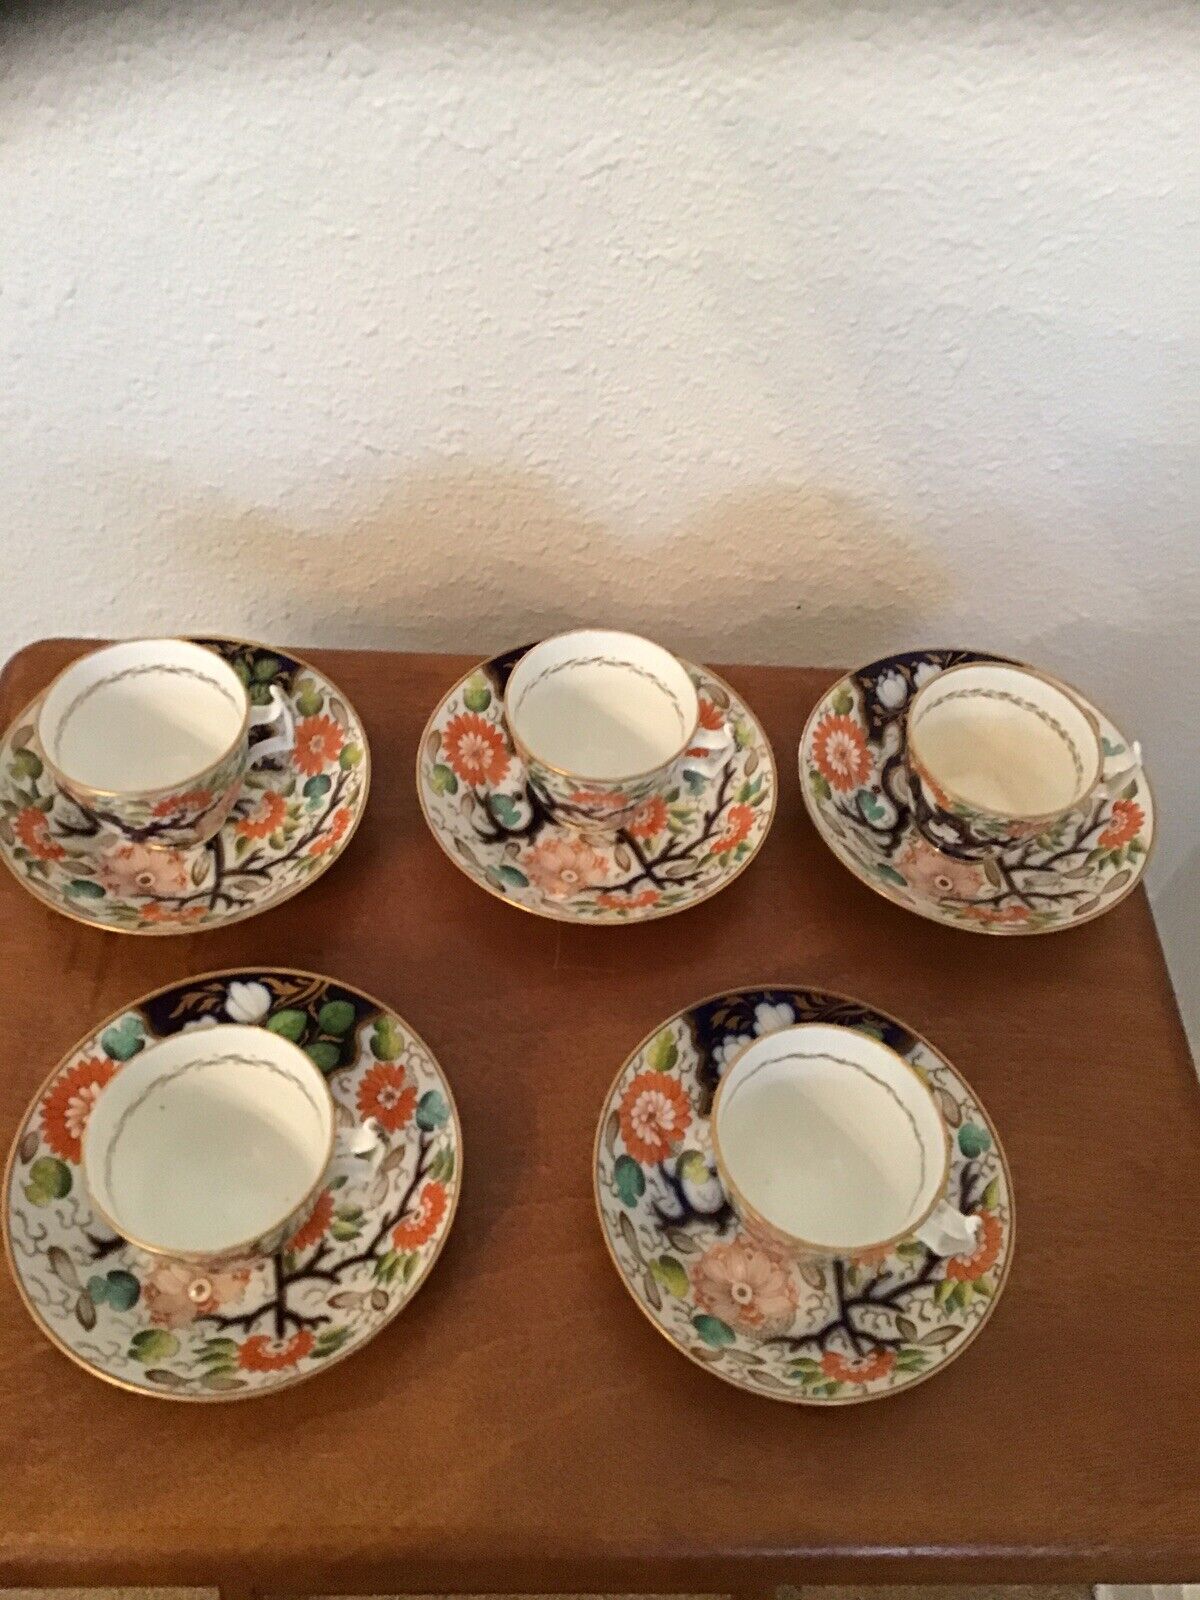 Set Of 5 Antique London shape New Hall? Imari design Cups & Saucers Early 1800’s